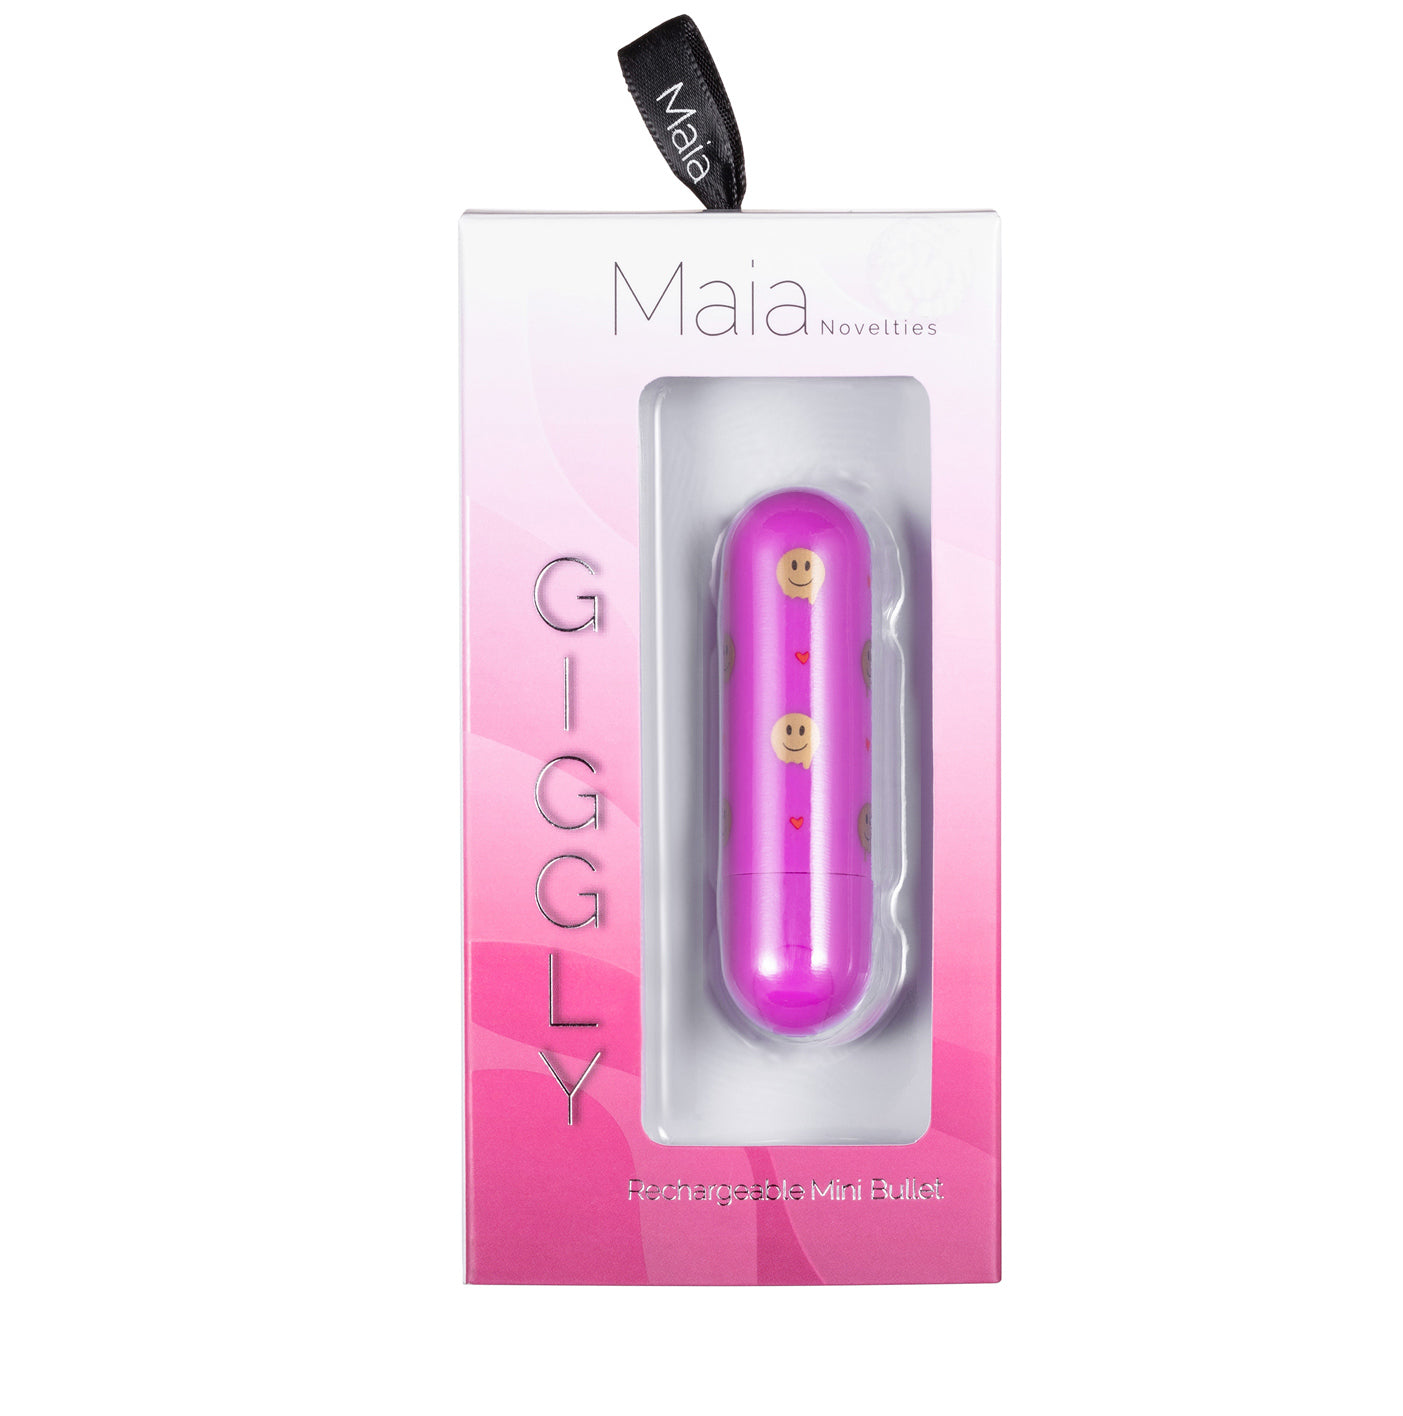 Giggly Super Charged Mini Bullet Vibrator - Pink